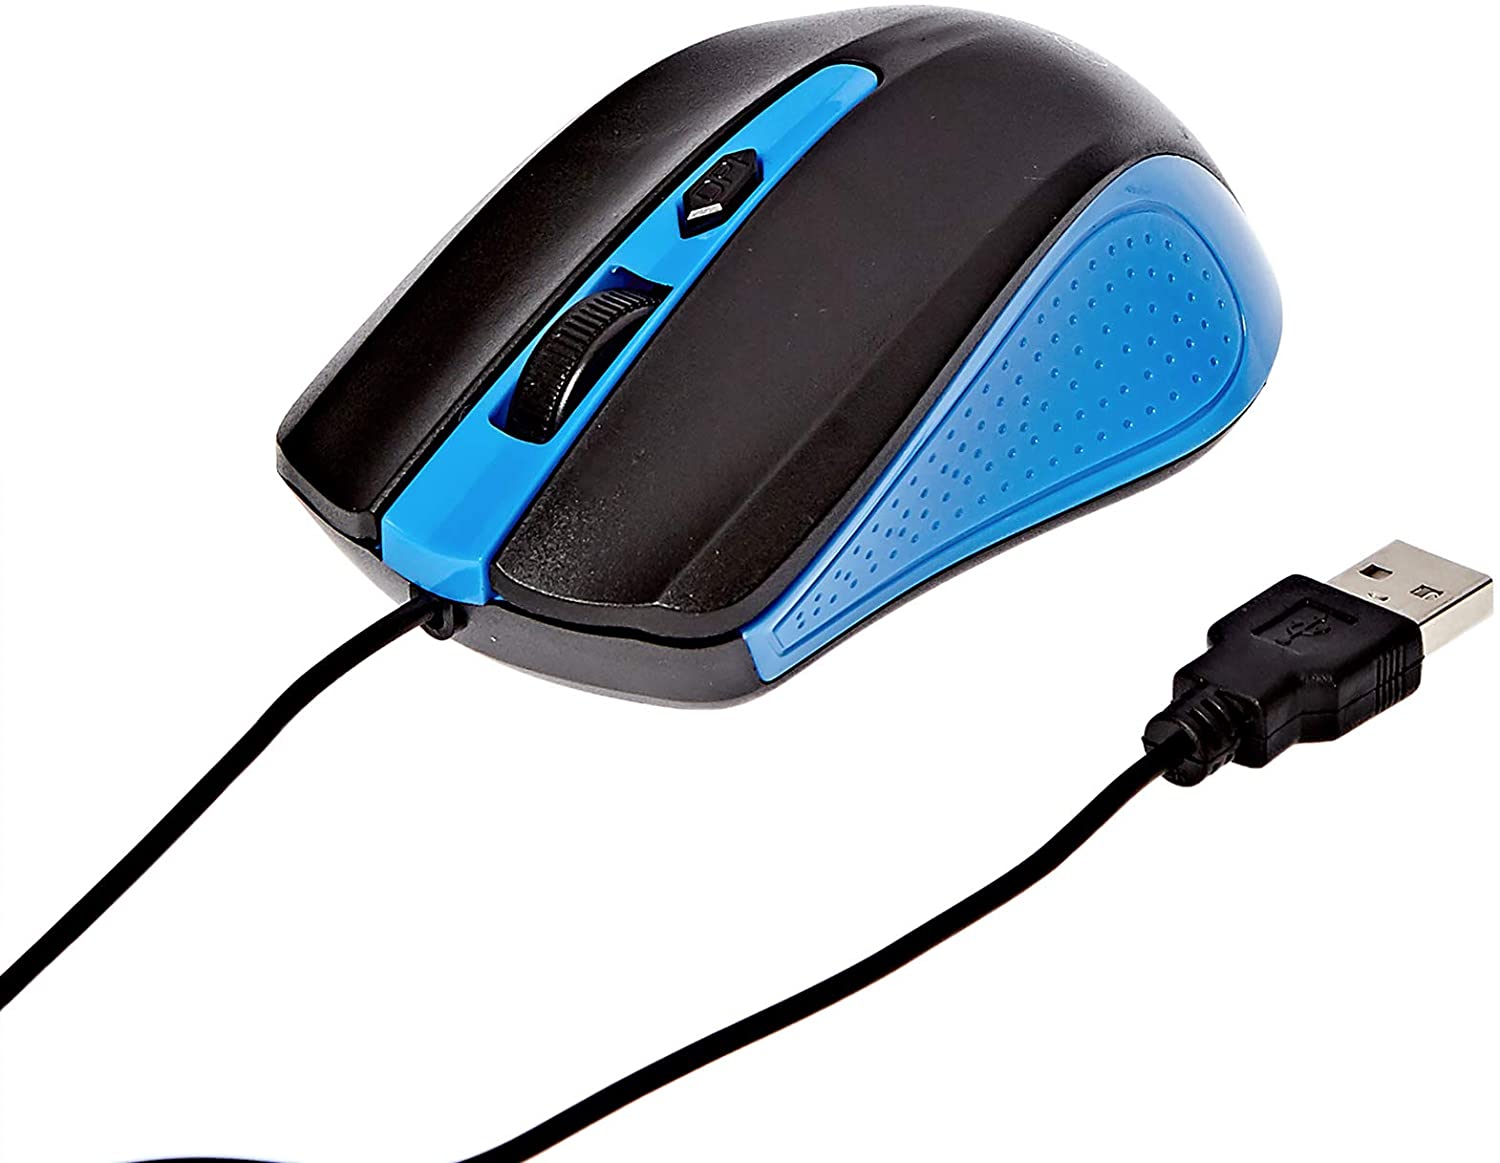 Enet Wired Optical Mouse 1600DPI USB